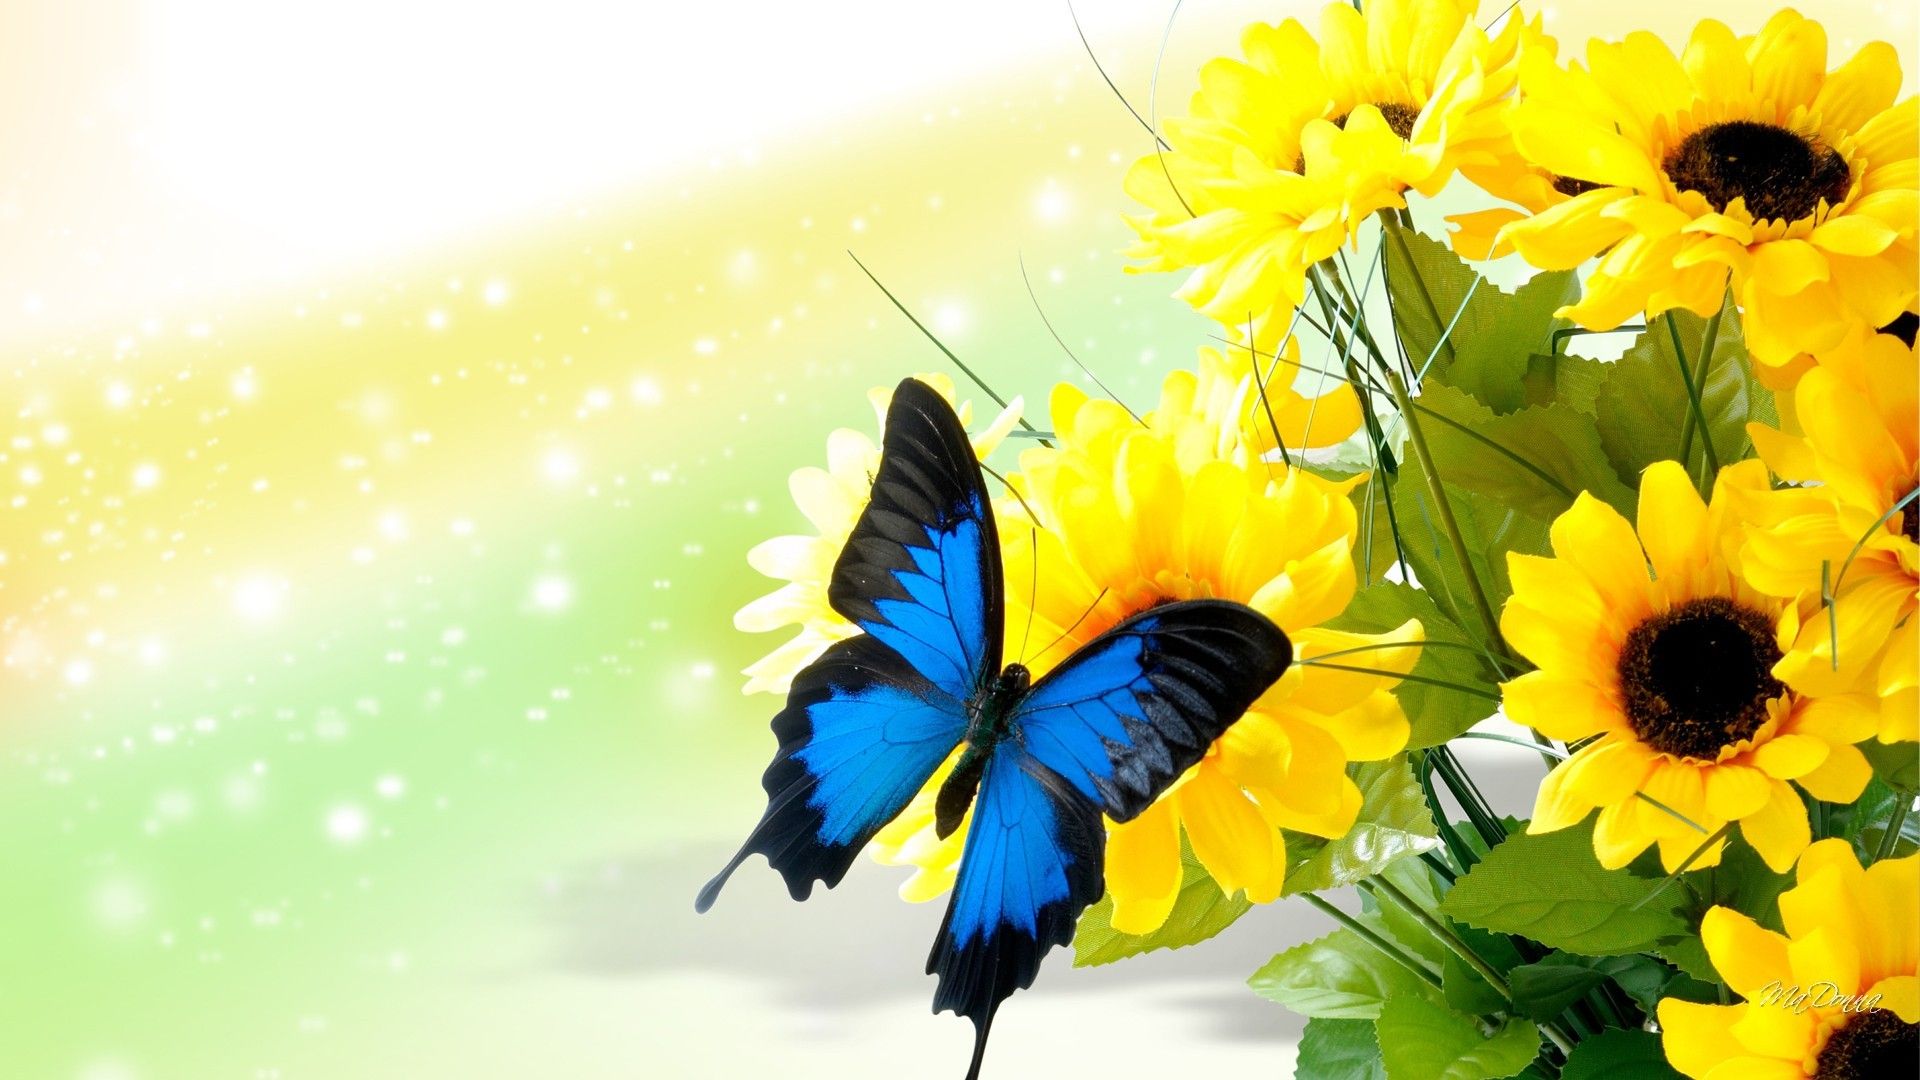 Sunflowers and Butterflies Wallpapers.